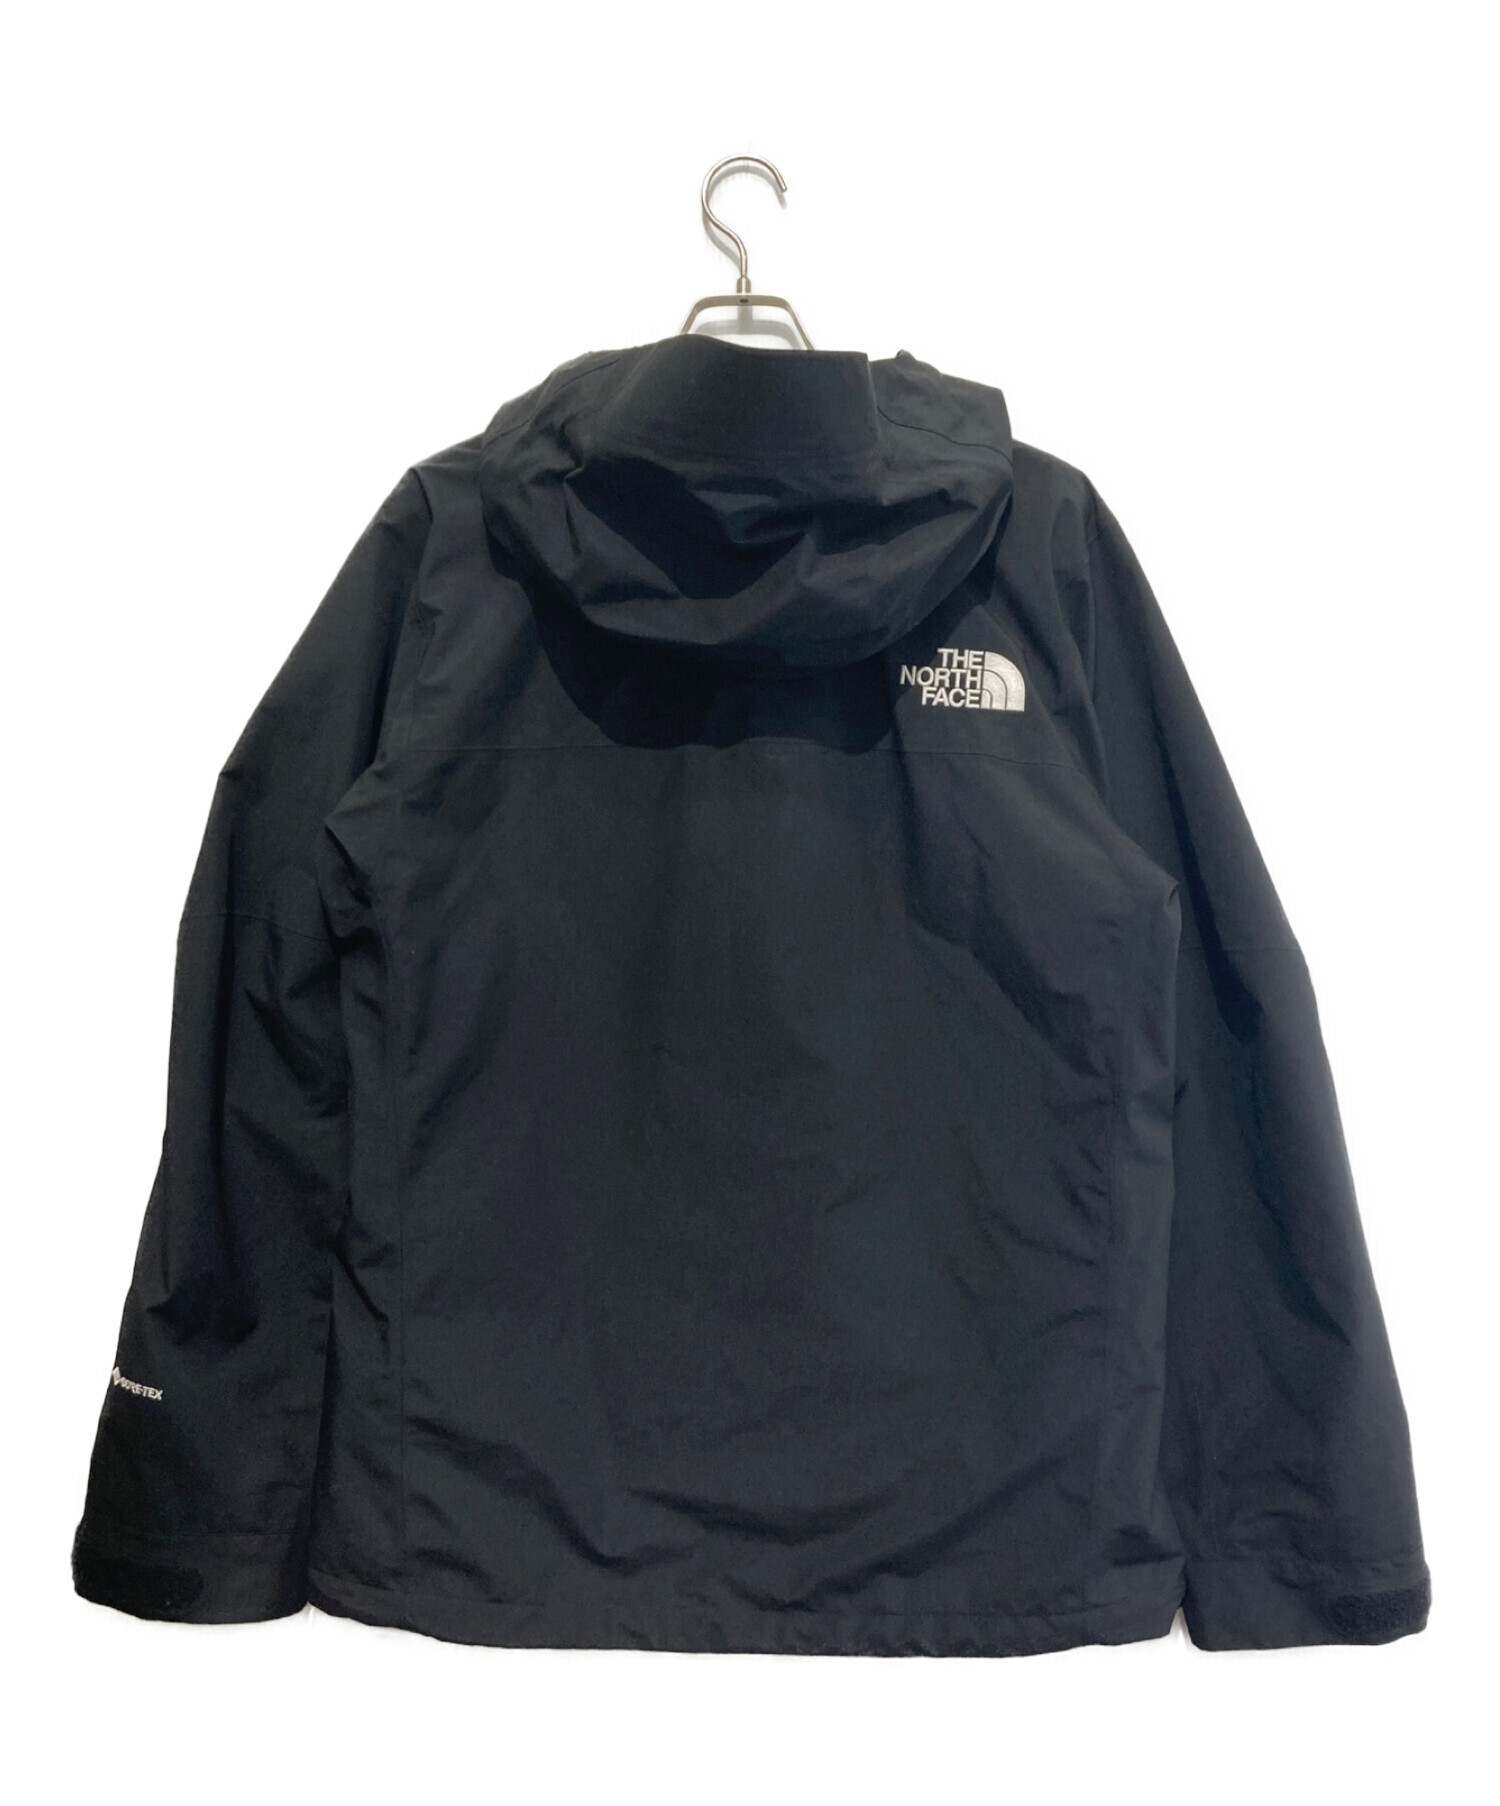 THE NORTH FACE MOUNTAIN JACKET XL 黒